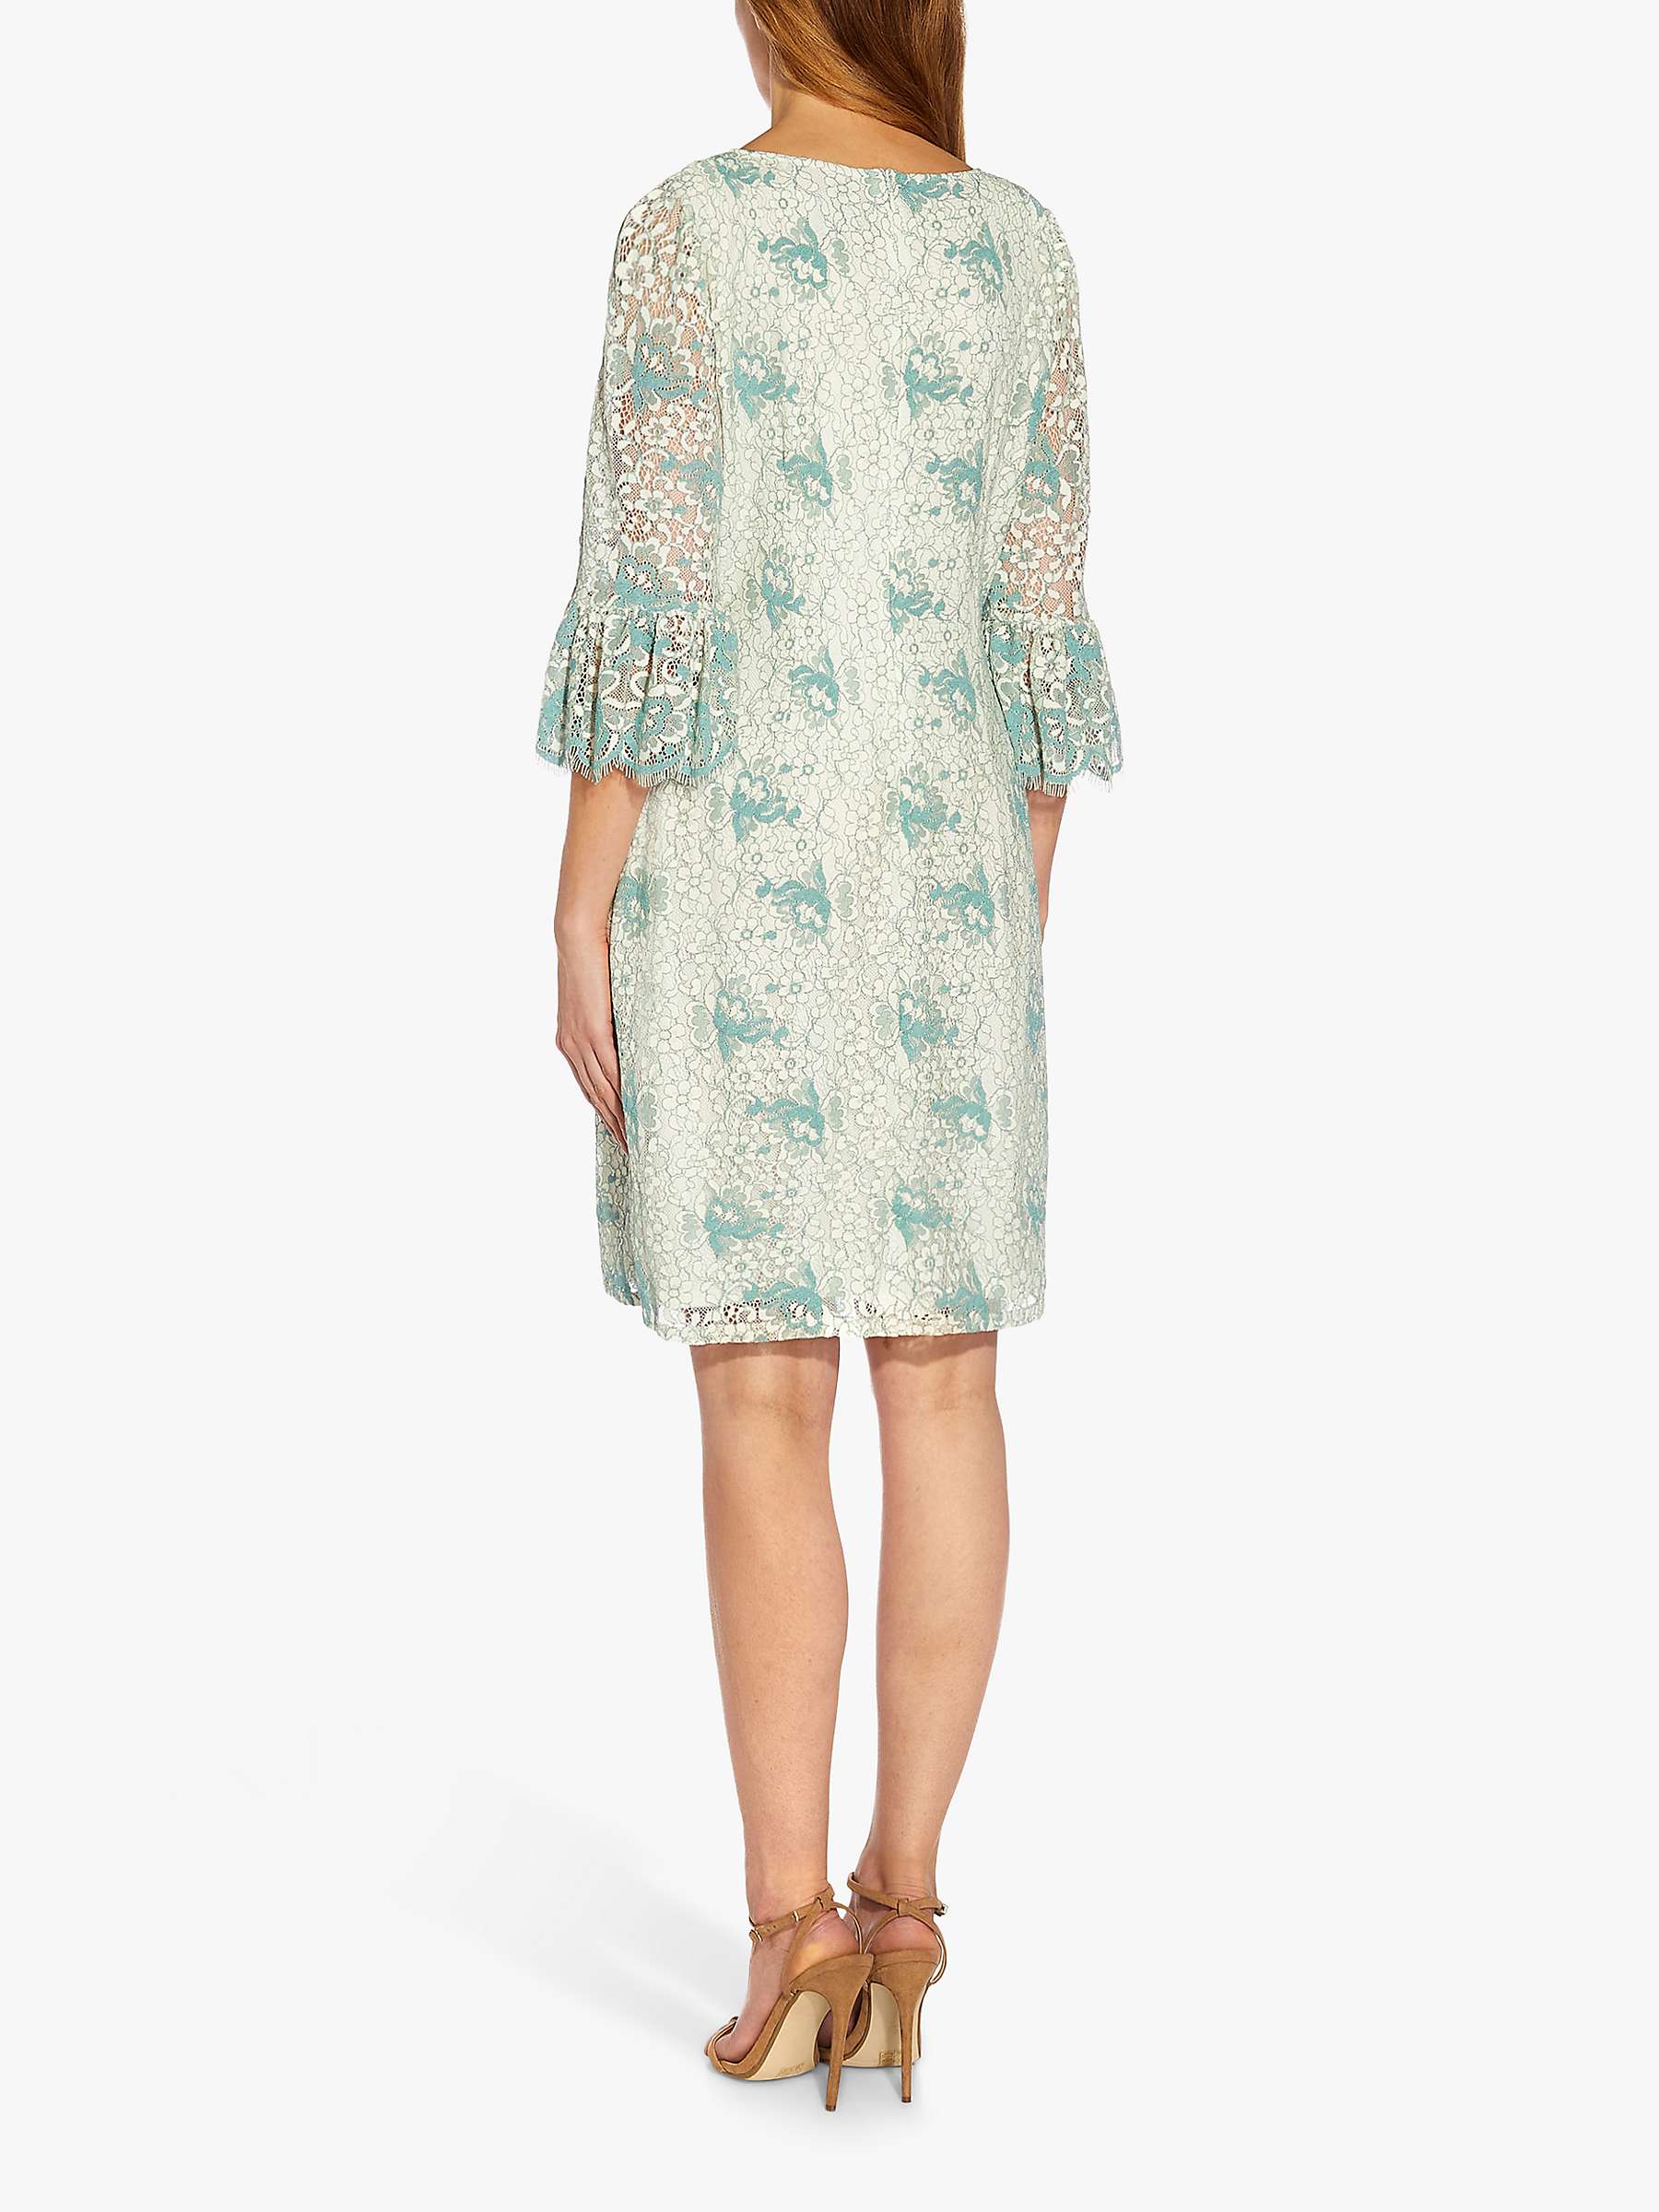 Buy Adrianna Papell Floral Lace Scallop Trim Shift Dress, Ivory/Mint Online at johnlewis.com